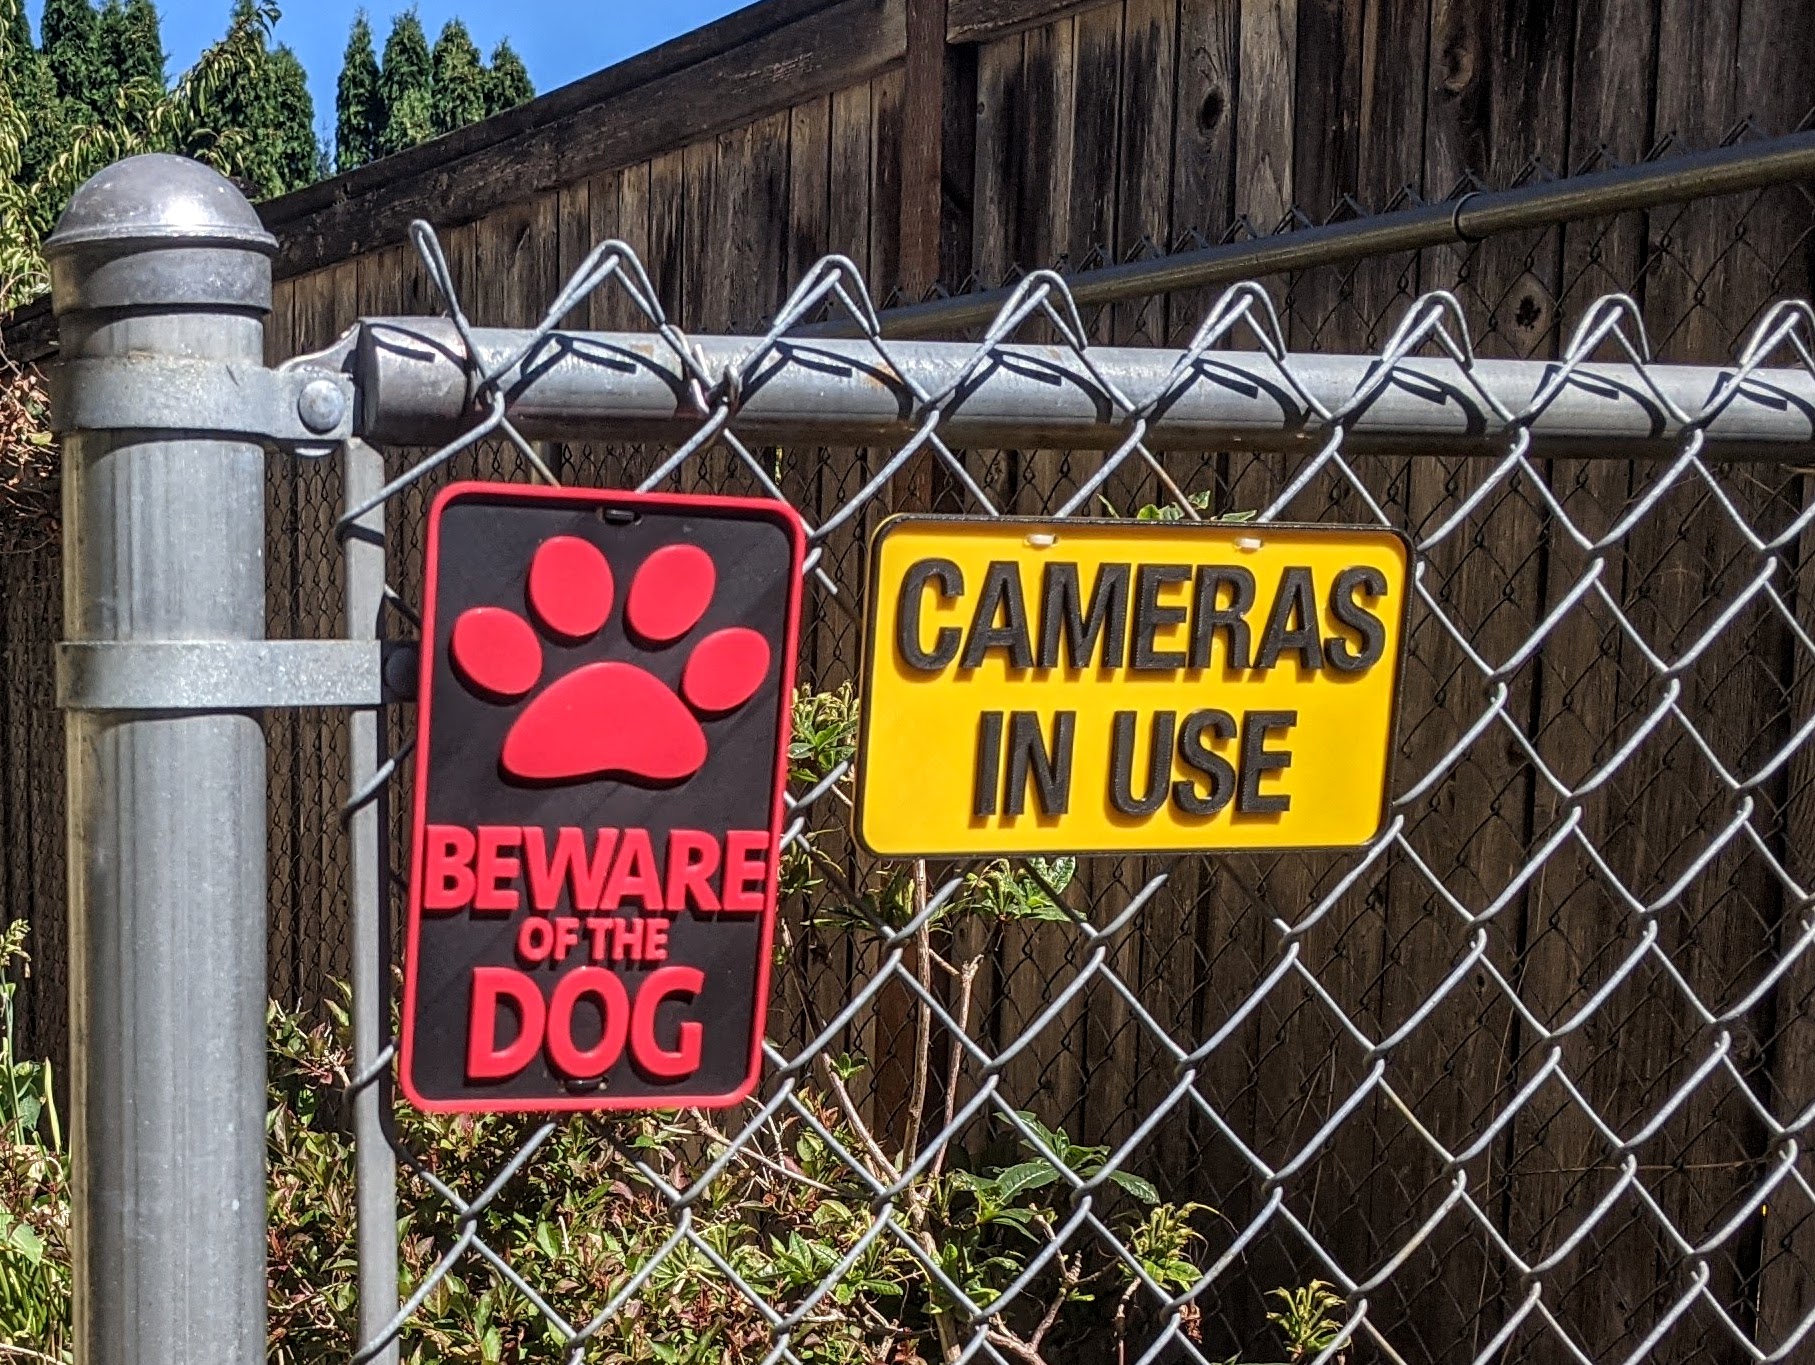 CAMERAS IN USE sign.